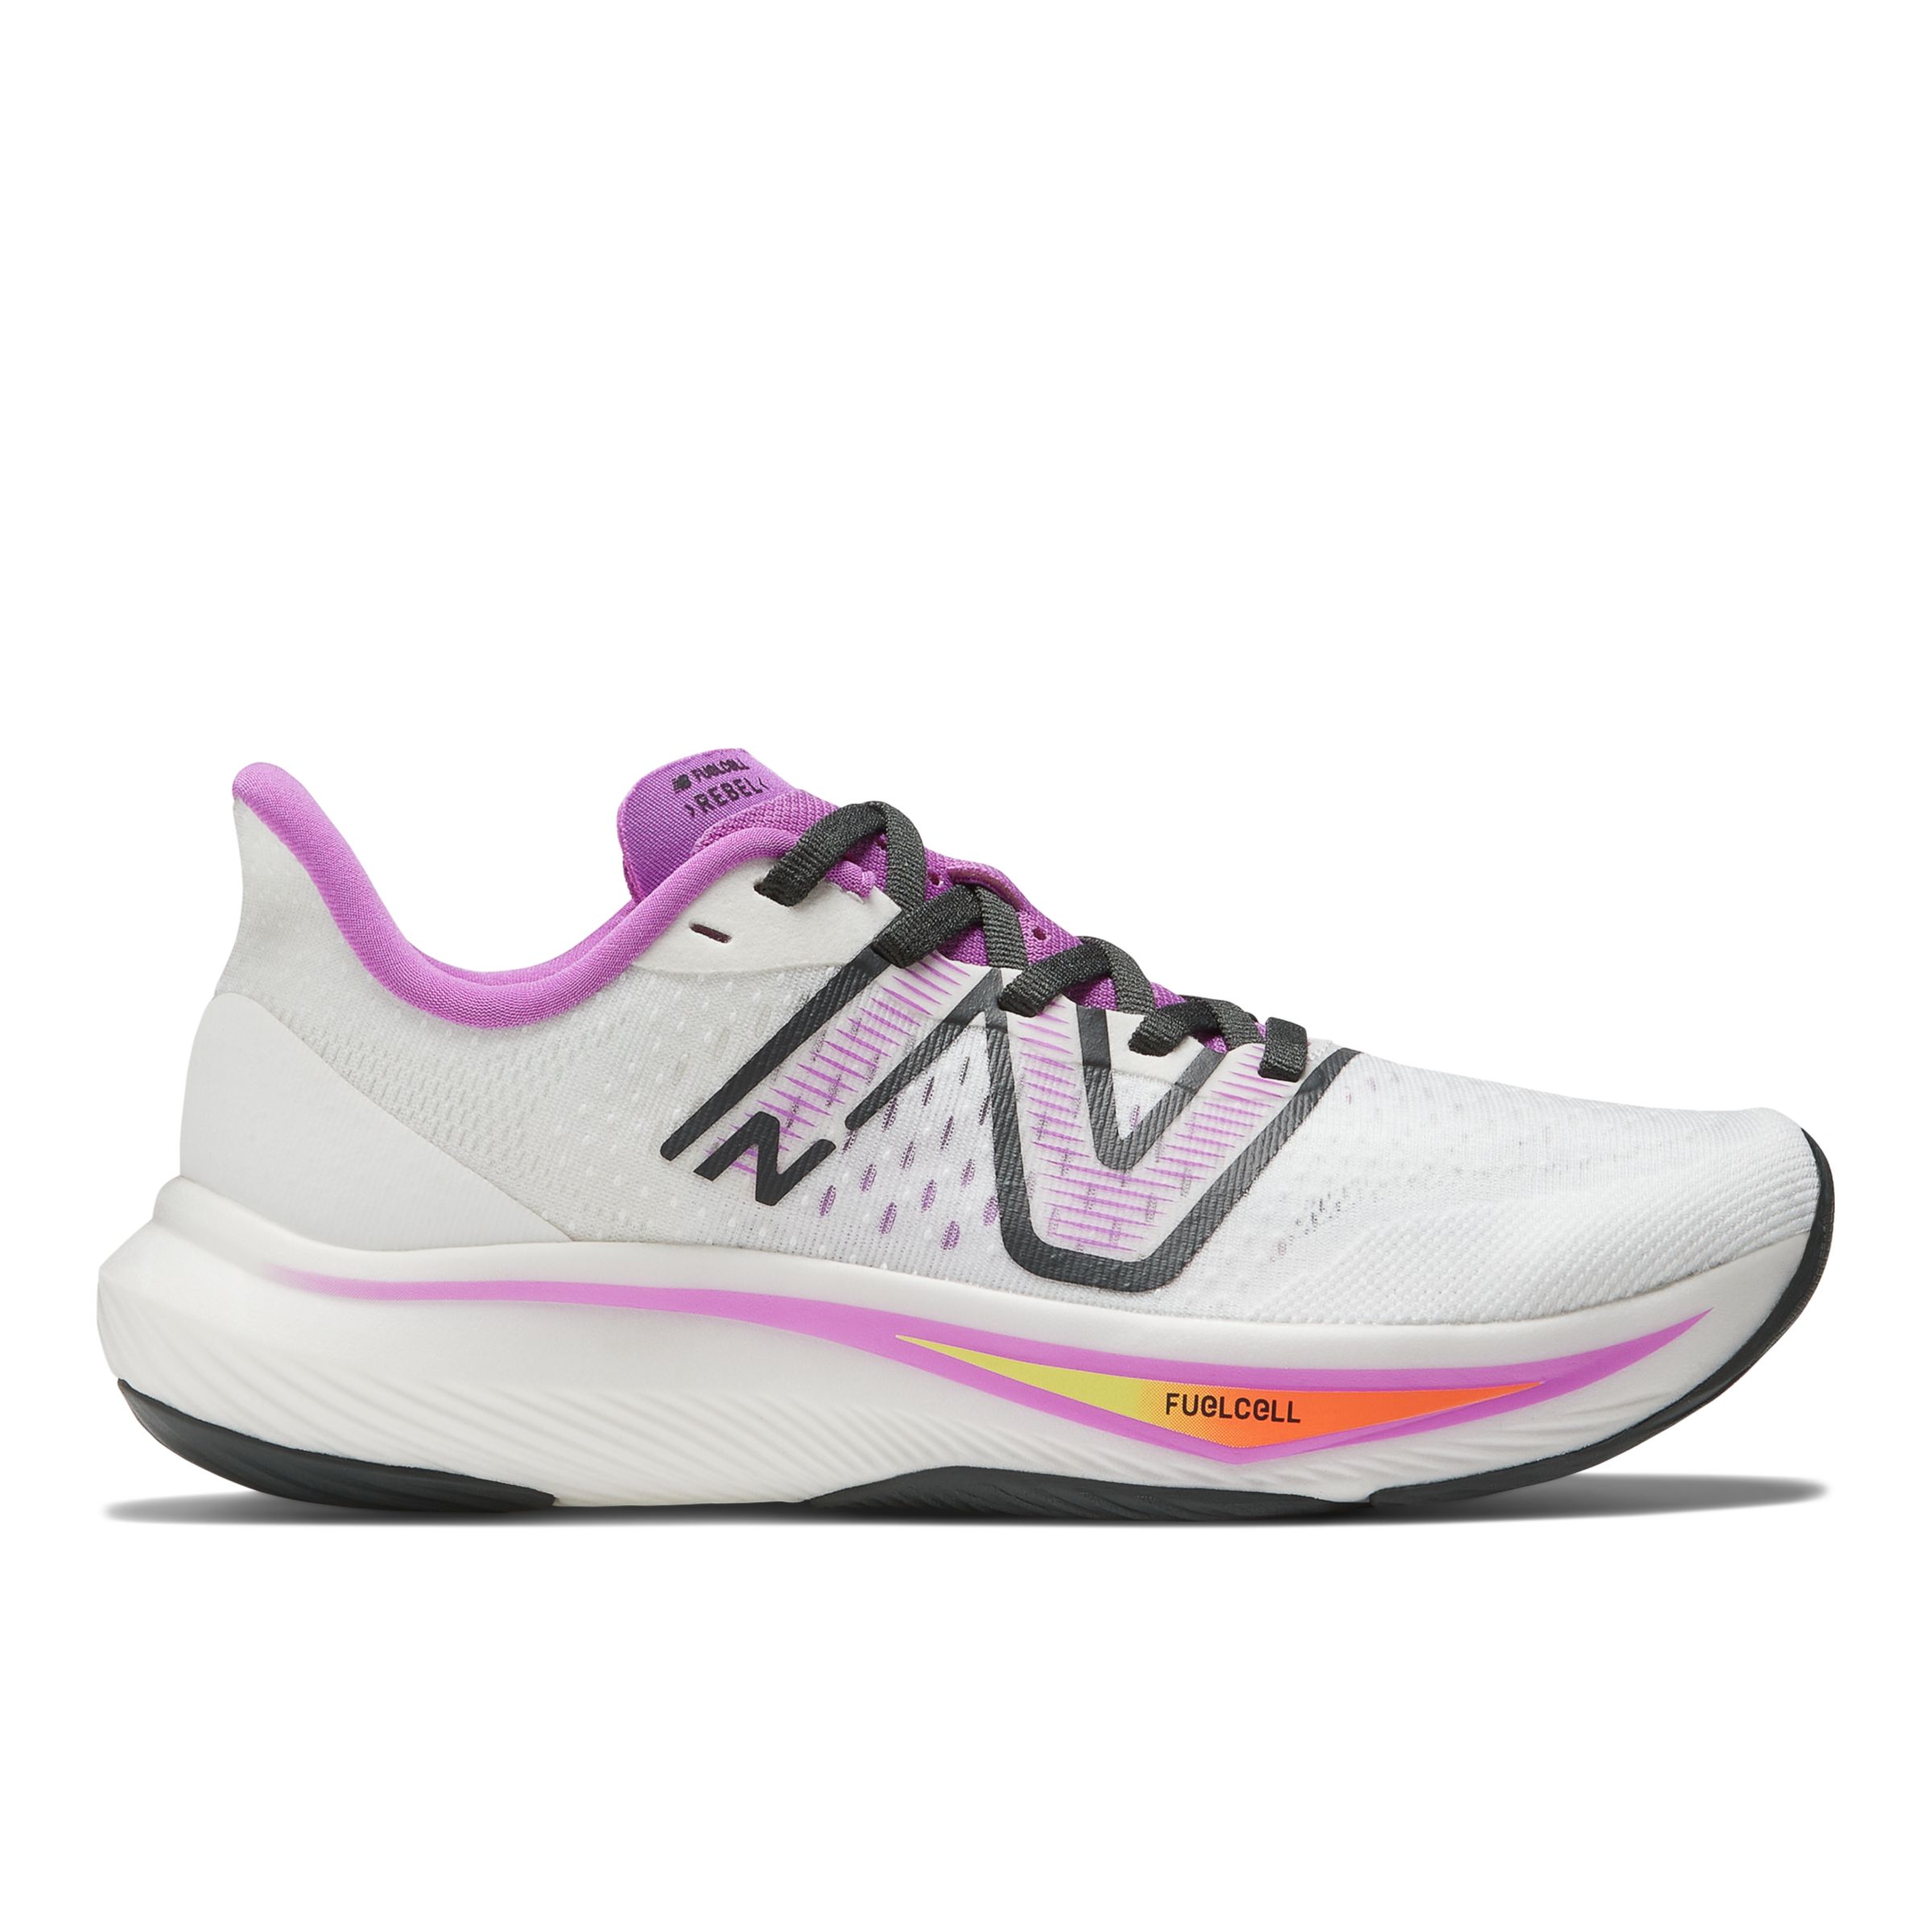 New Balance Femme FuelCell Rebel v3 en Blanc/Rose/Gris, Synthetic, Taille 37